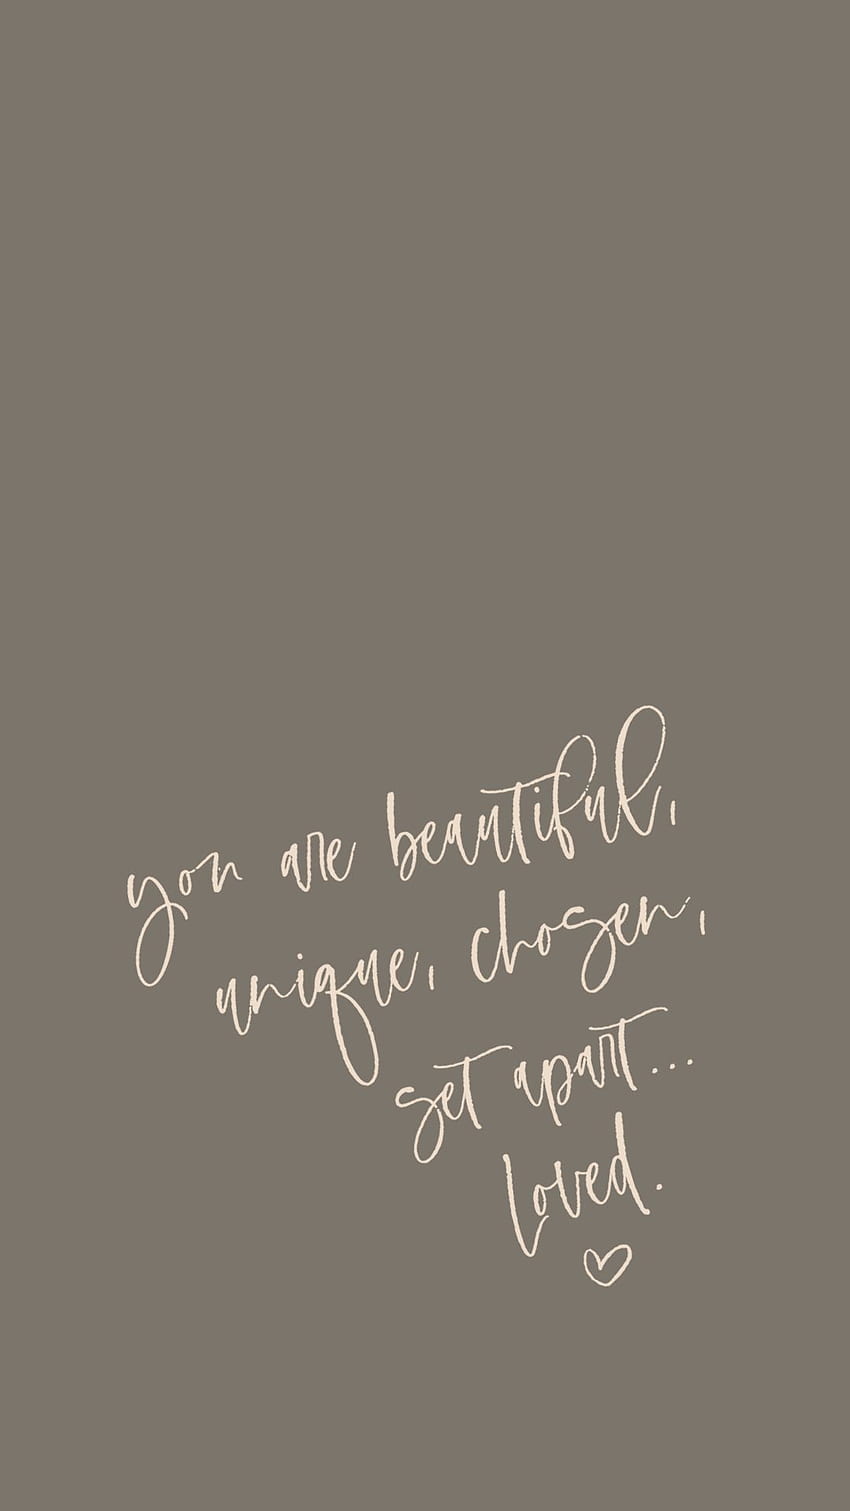 IPhone Background. Handwritten. Inspirational Qu. iphone quotes ...